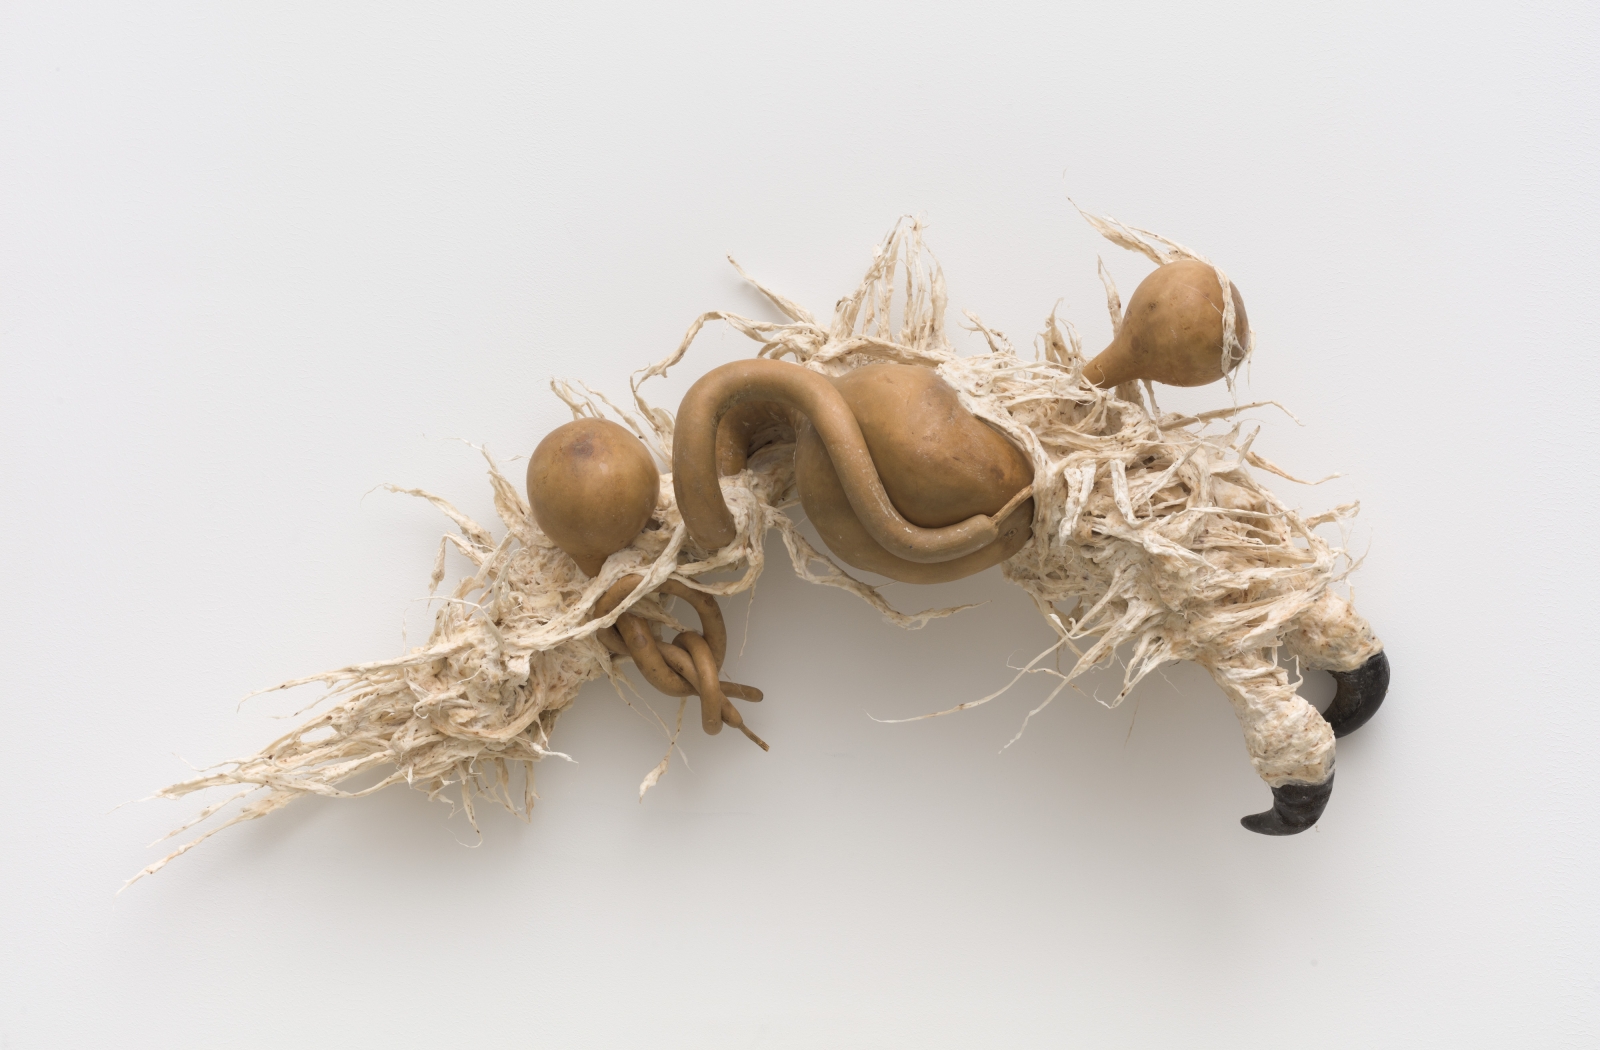 Guadalupe Maravilla
Ancestral Stomach 5, 2021
dried gourd with mixed media
19 1/2 x 37 x 8 1/2 ins.
49.5 x 94 x 21.6 cm